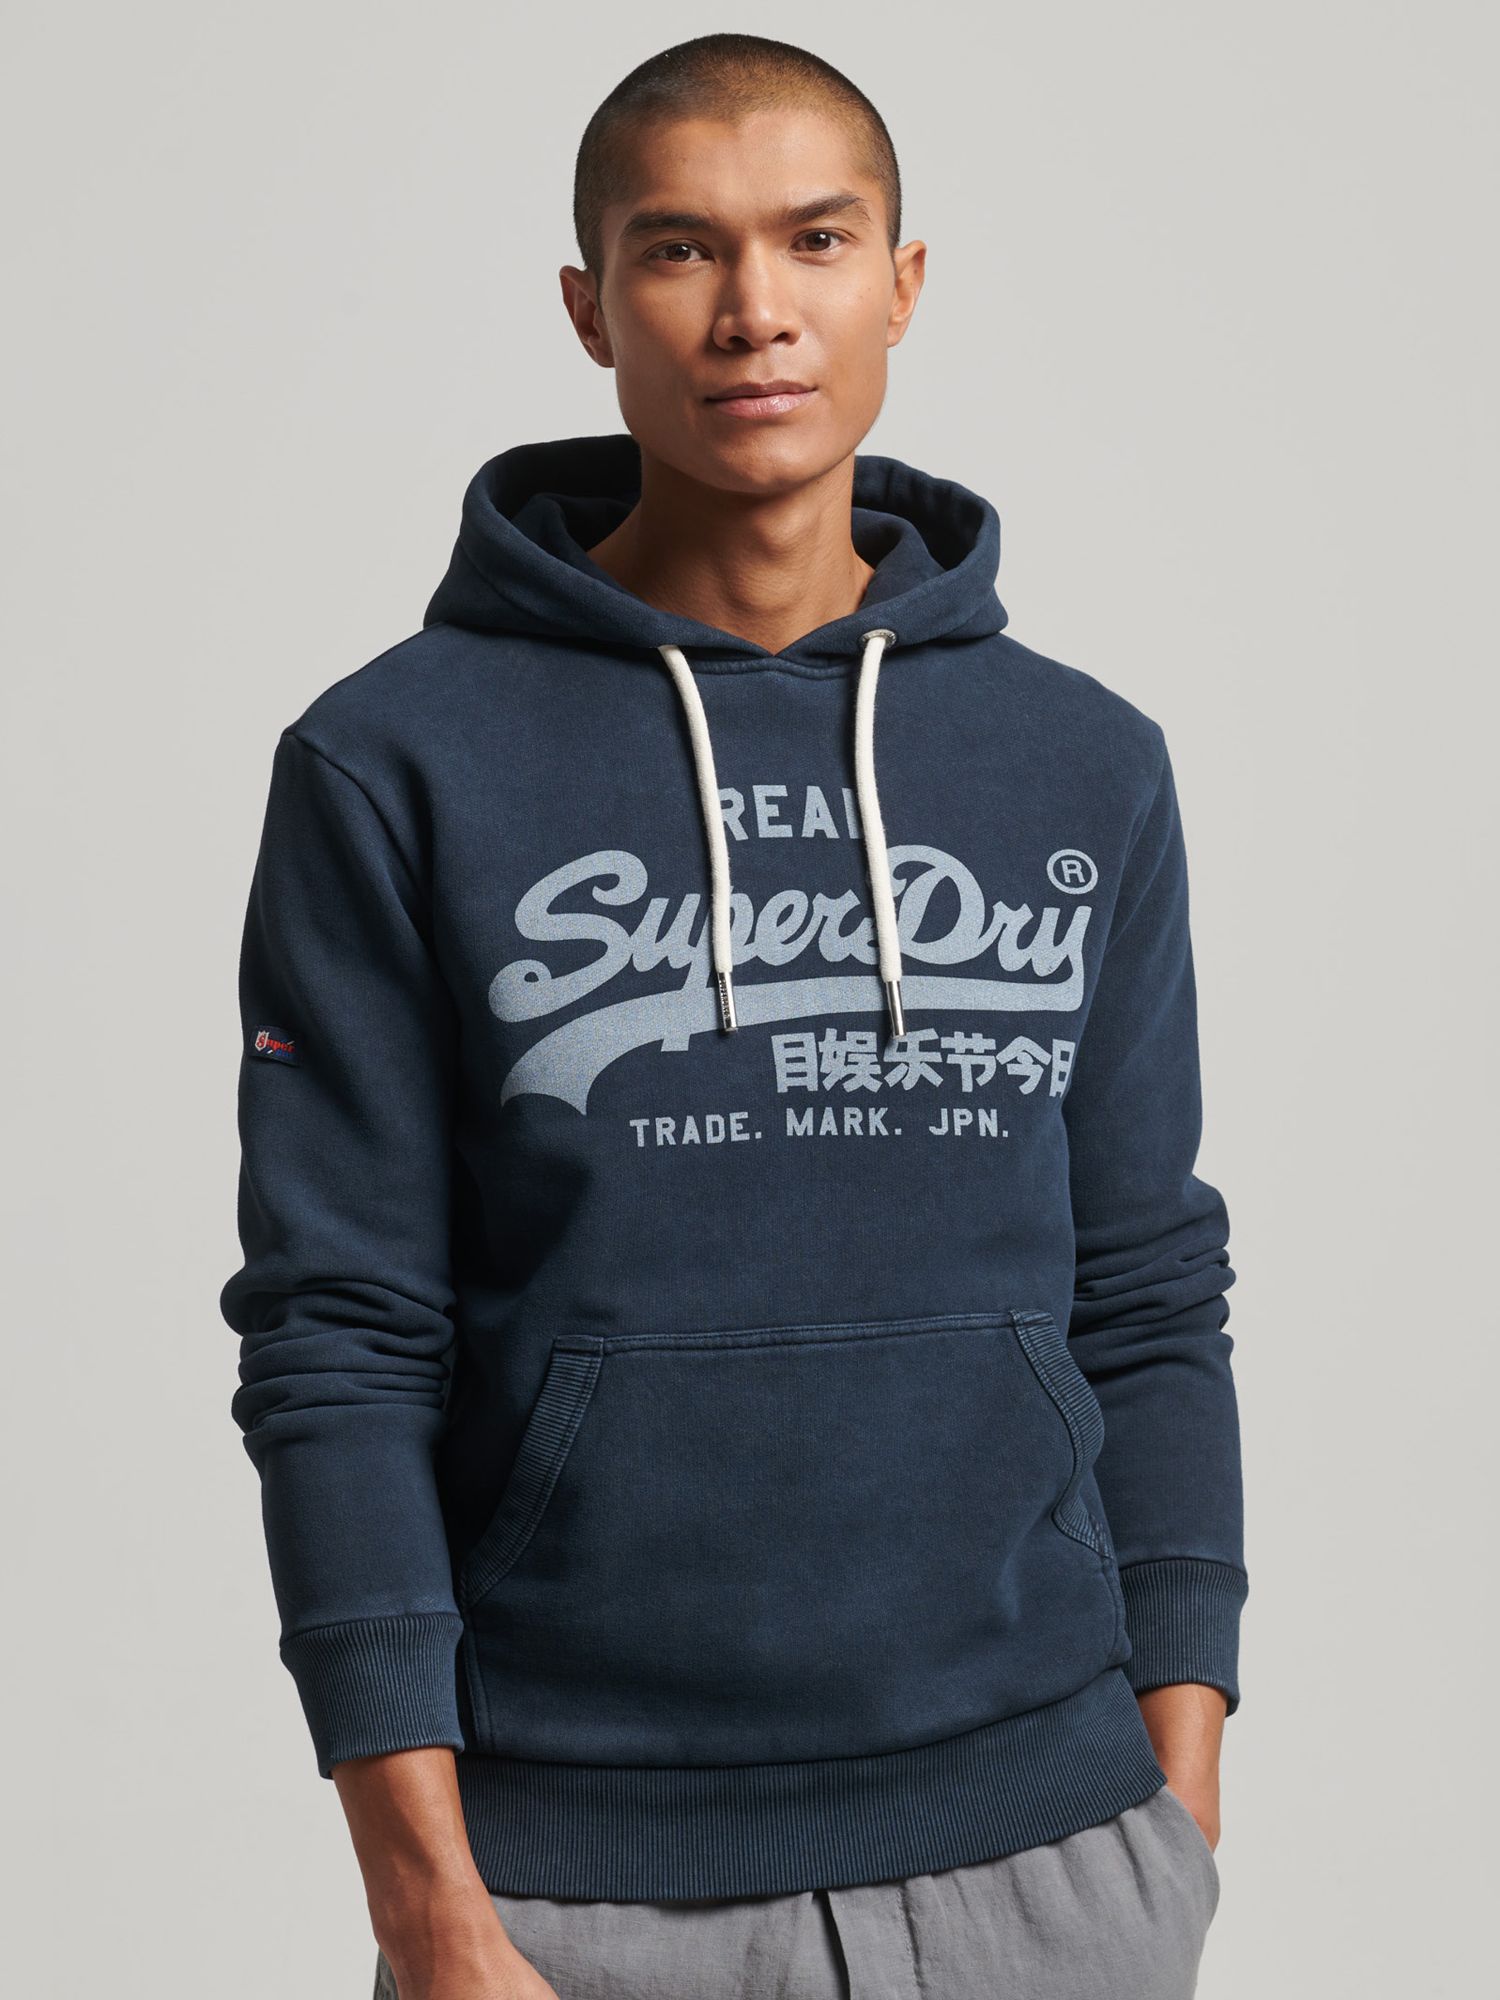 Mens Superdry Clothing